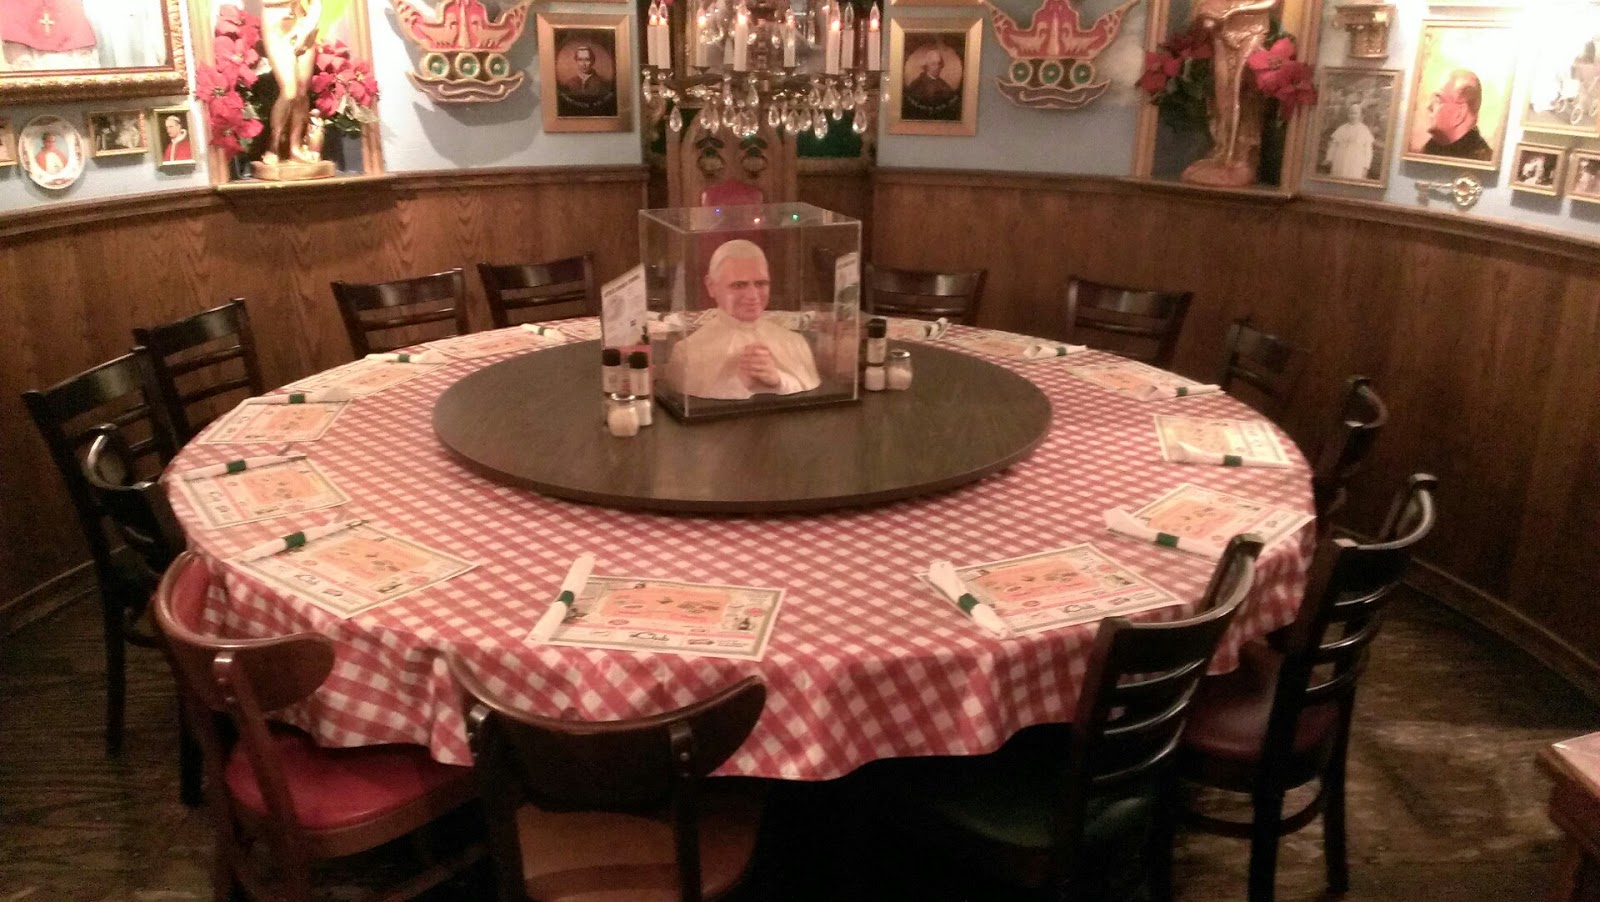 Pope Table